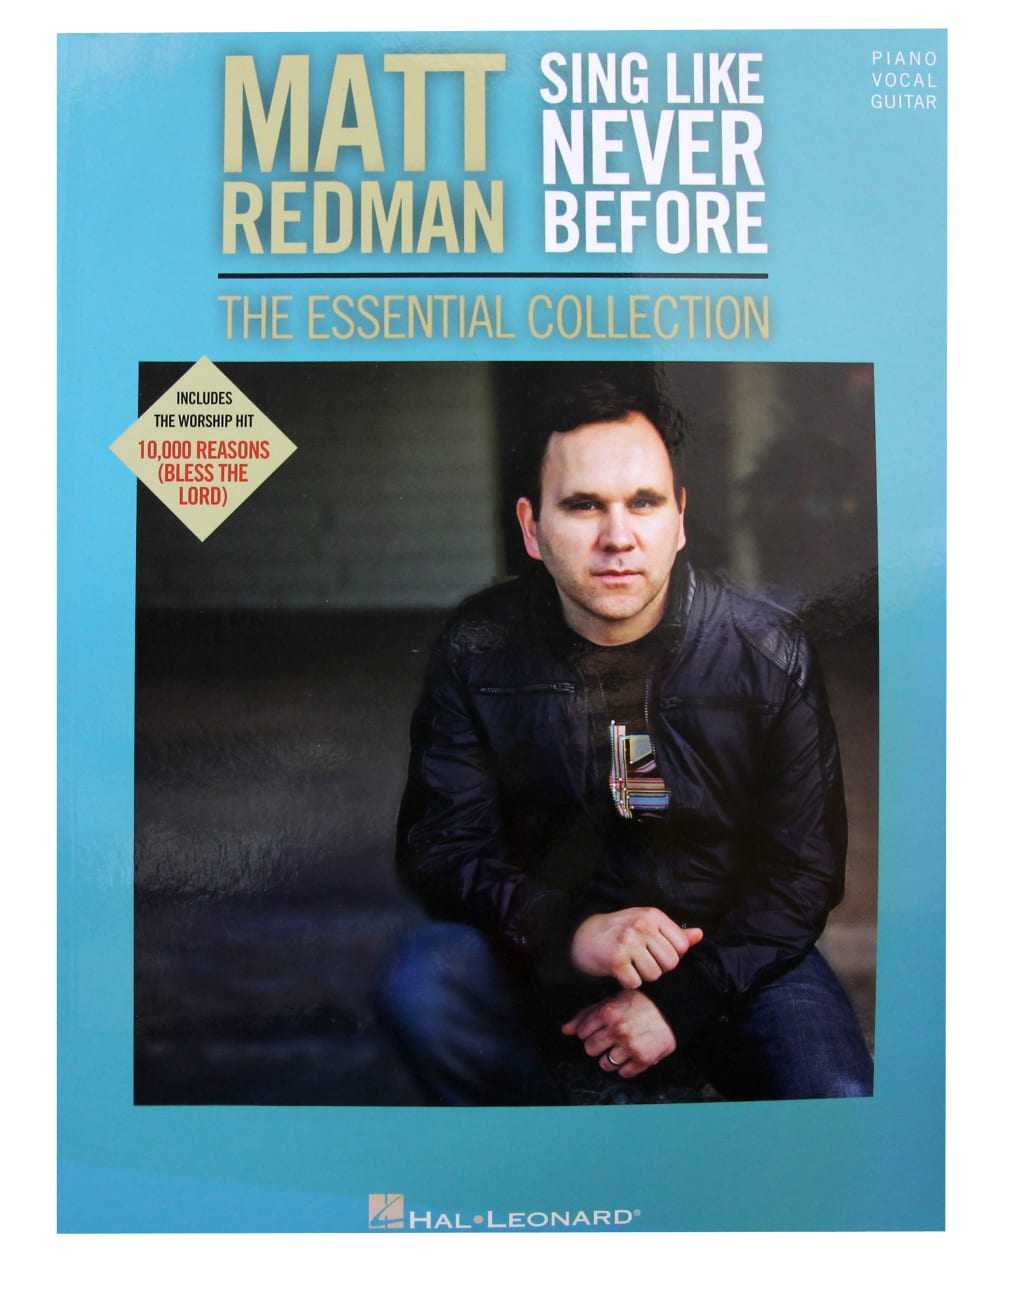 Matt Redman - Sing Like Never Before: The Essential Collection (Music Book) Paperback